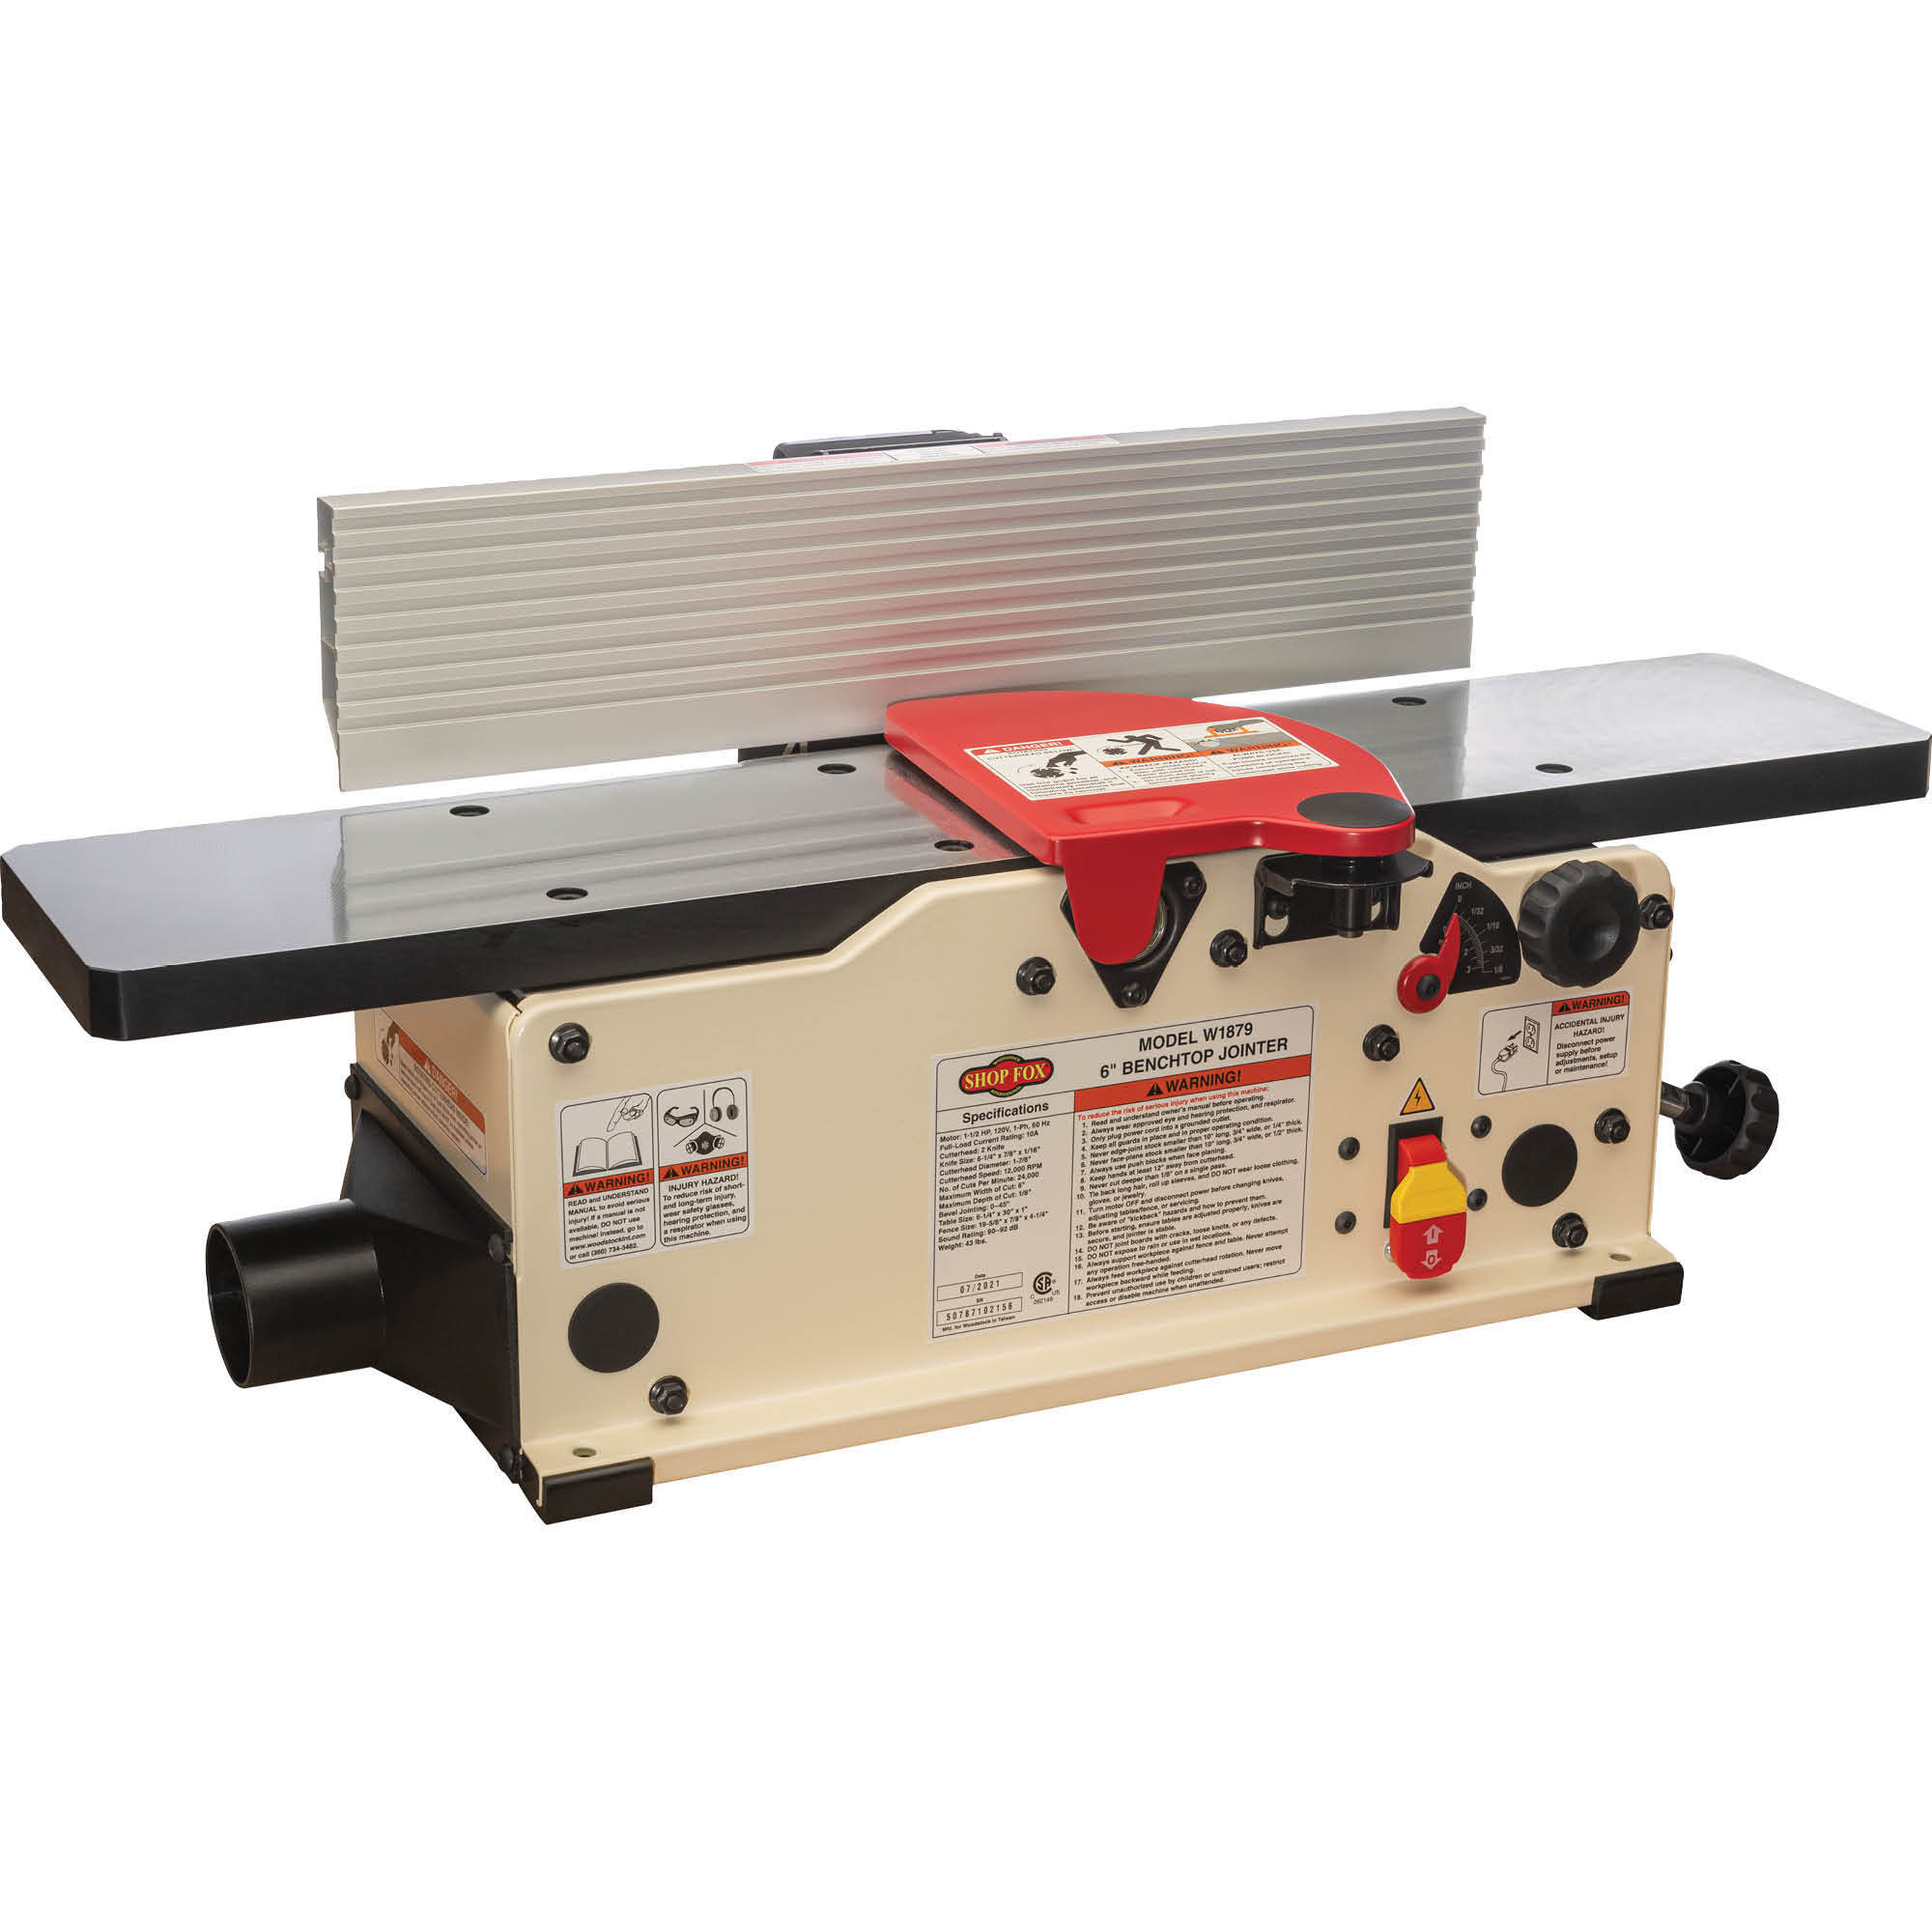 Shop Fox, 6Inch Benchtop Jointer with Straight Knives, Model W1879